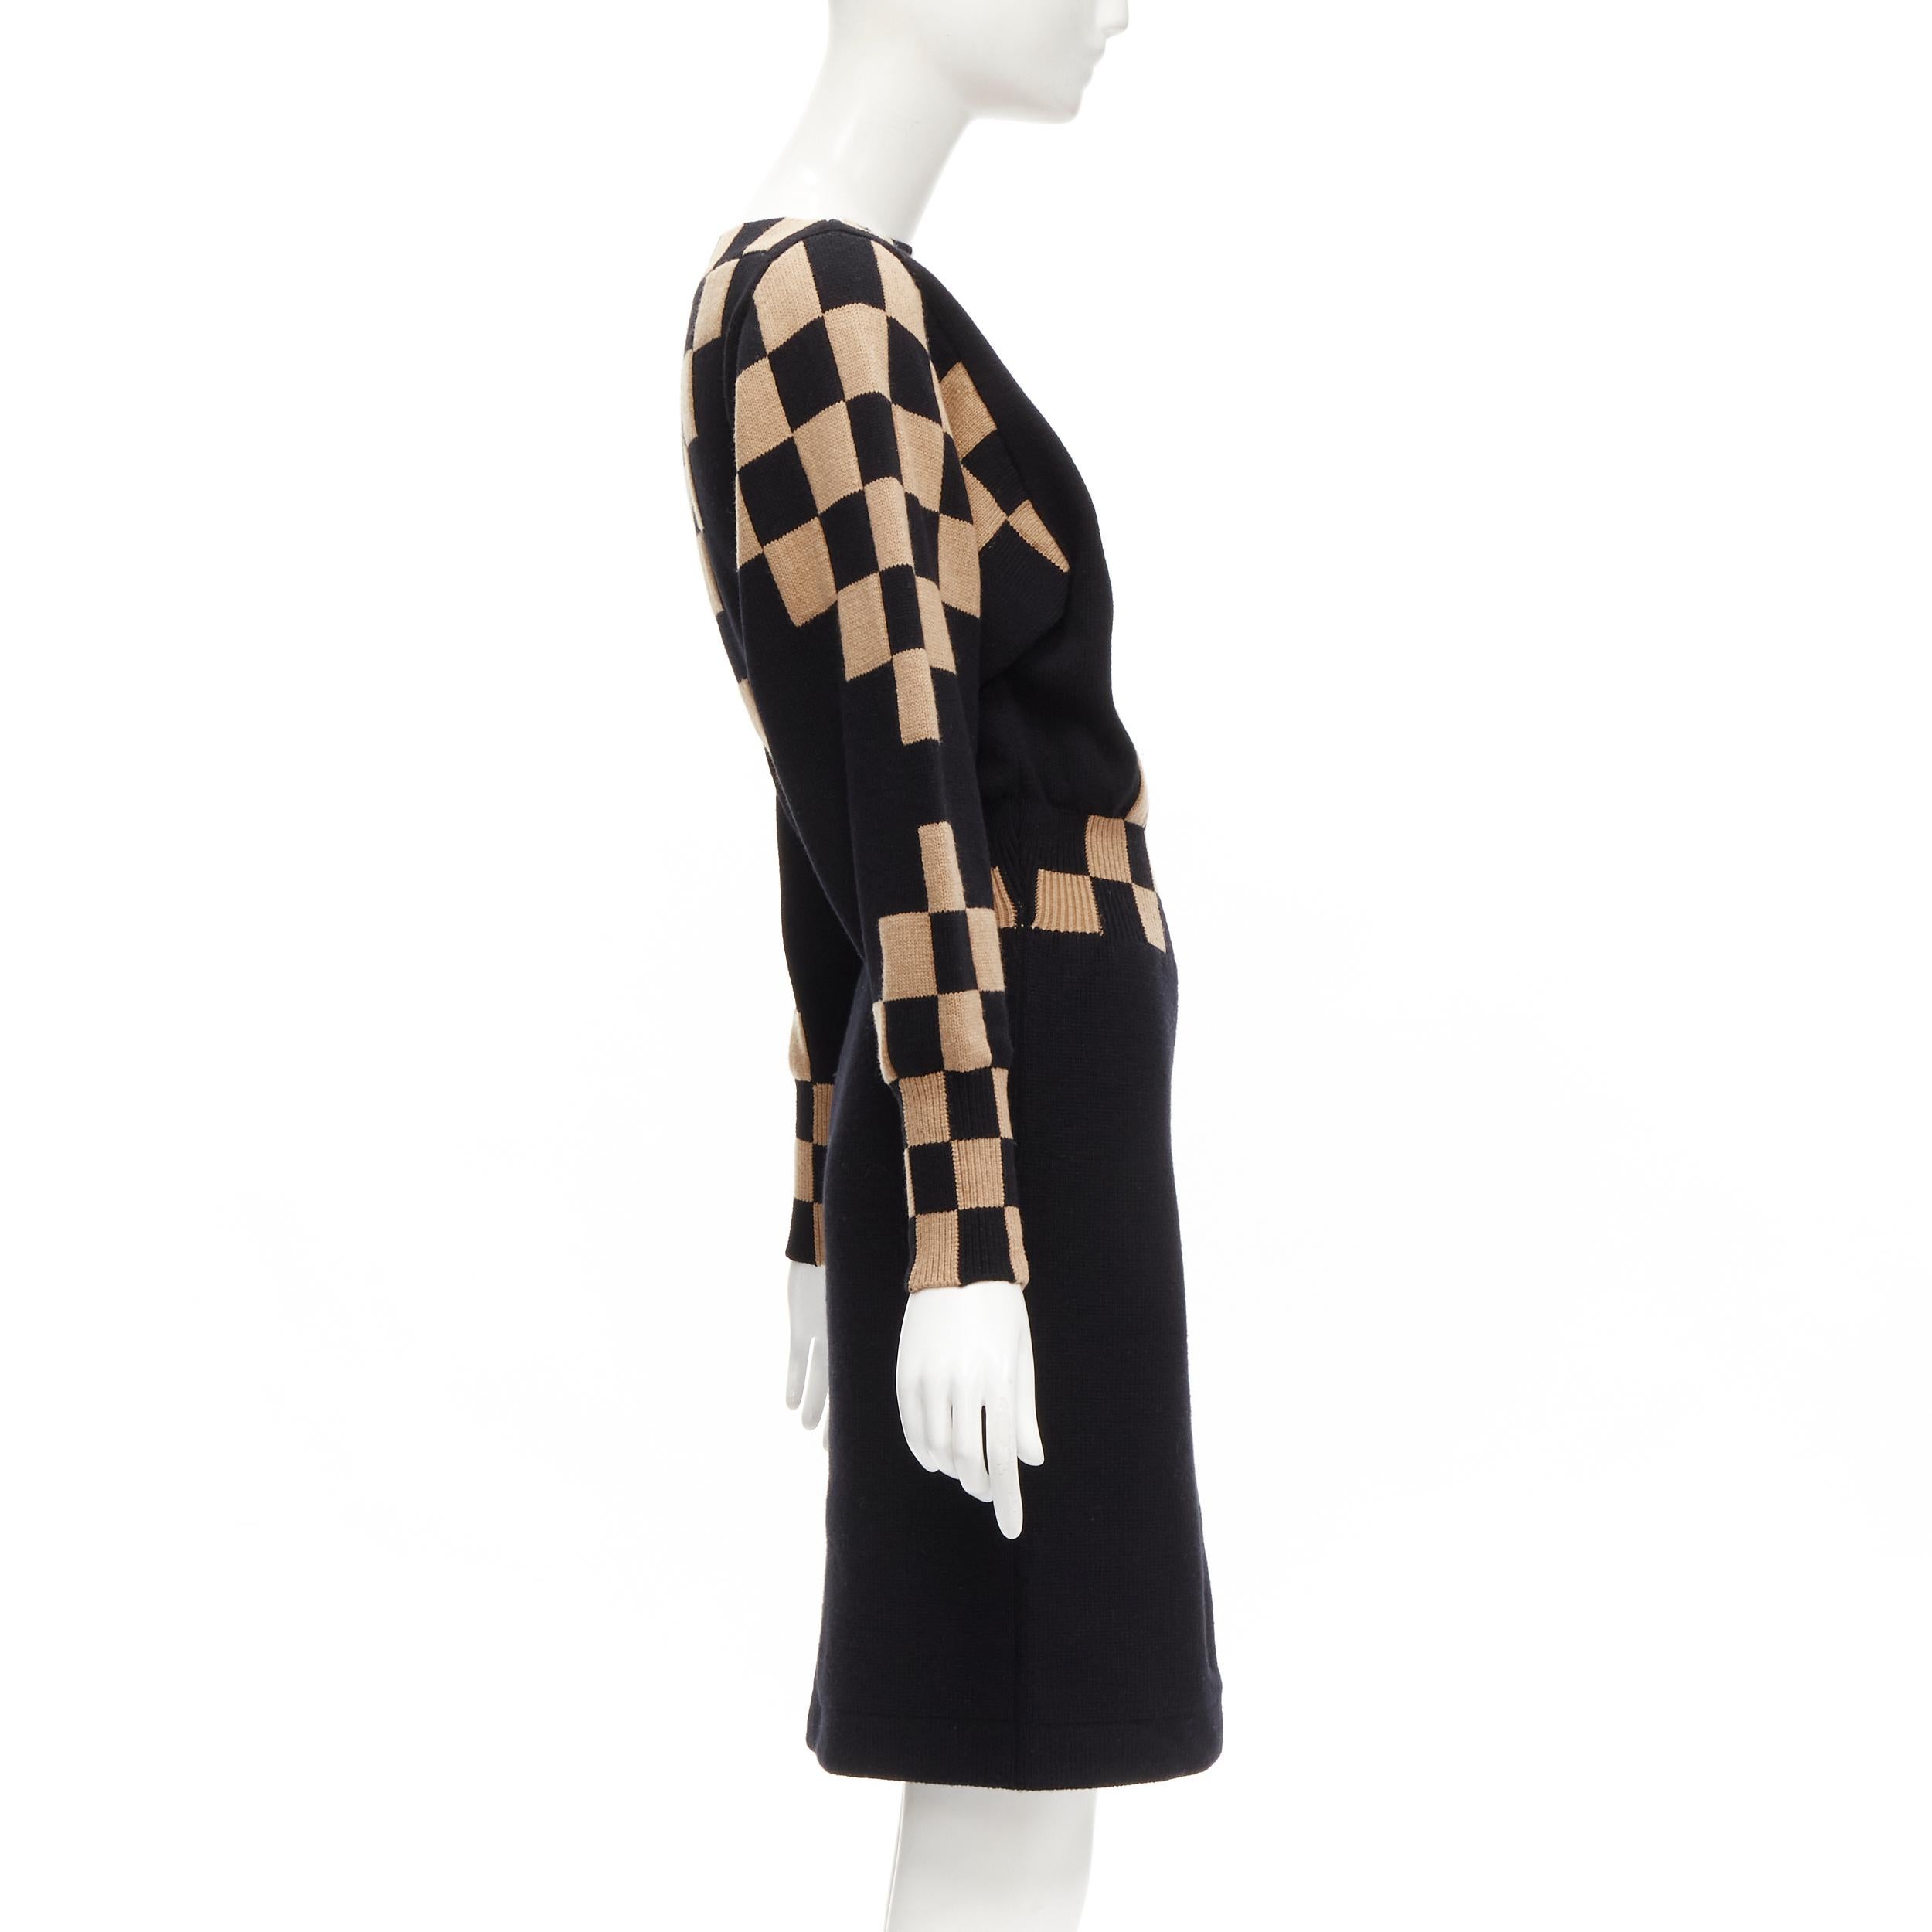 LOUIS VUITTON LV Damier wool cashmere pixel illusion knit dress S In Excellent Condition For Sale In Hong Kong, NT